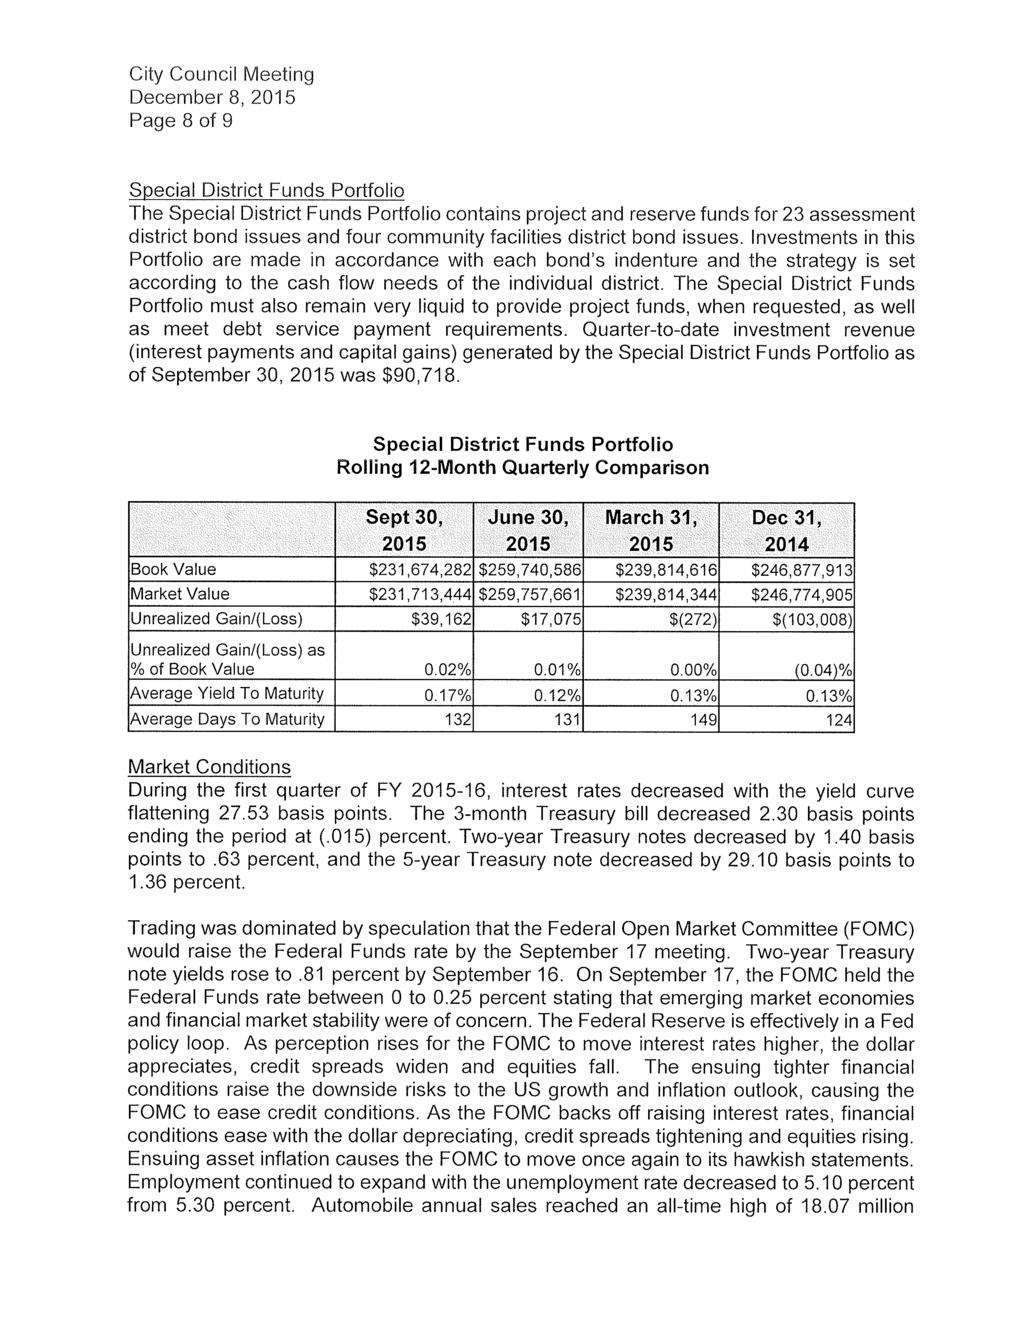 Page 8 of 9 Special District Funds Portfolio The Special District Funds Portfolio contains project and reserve funds for 23 assessment district bond issues and four community facilities district bond